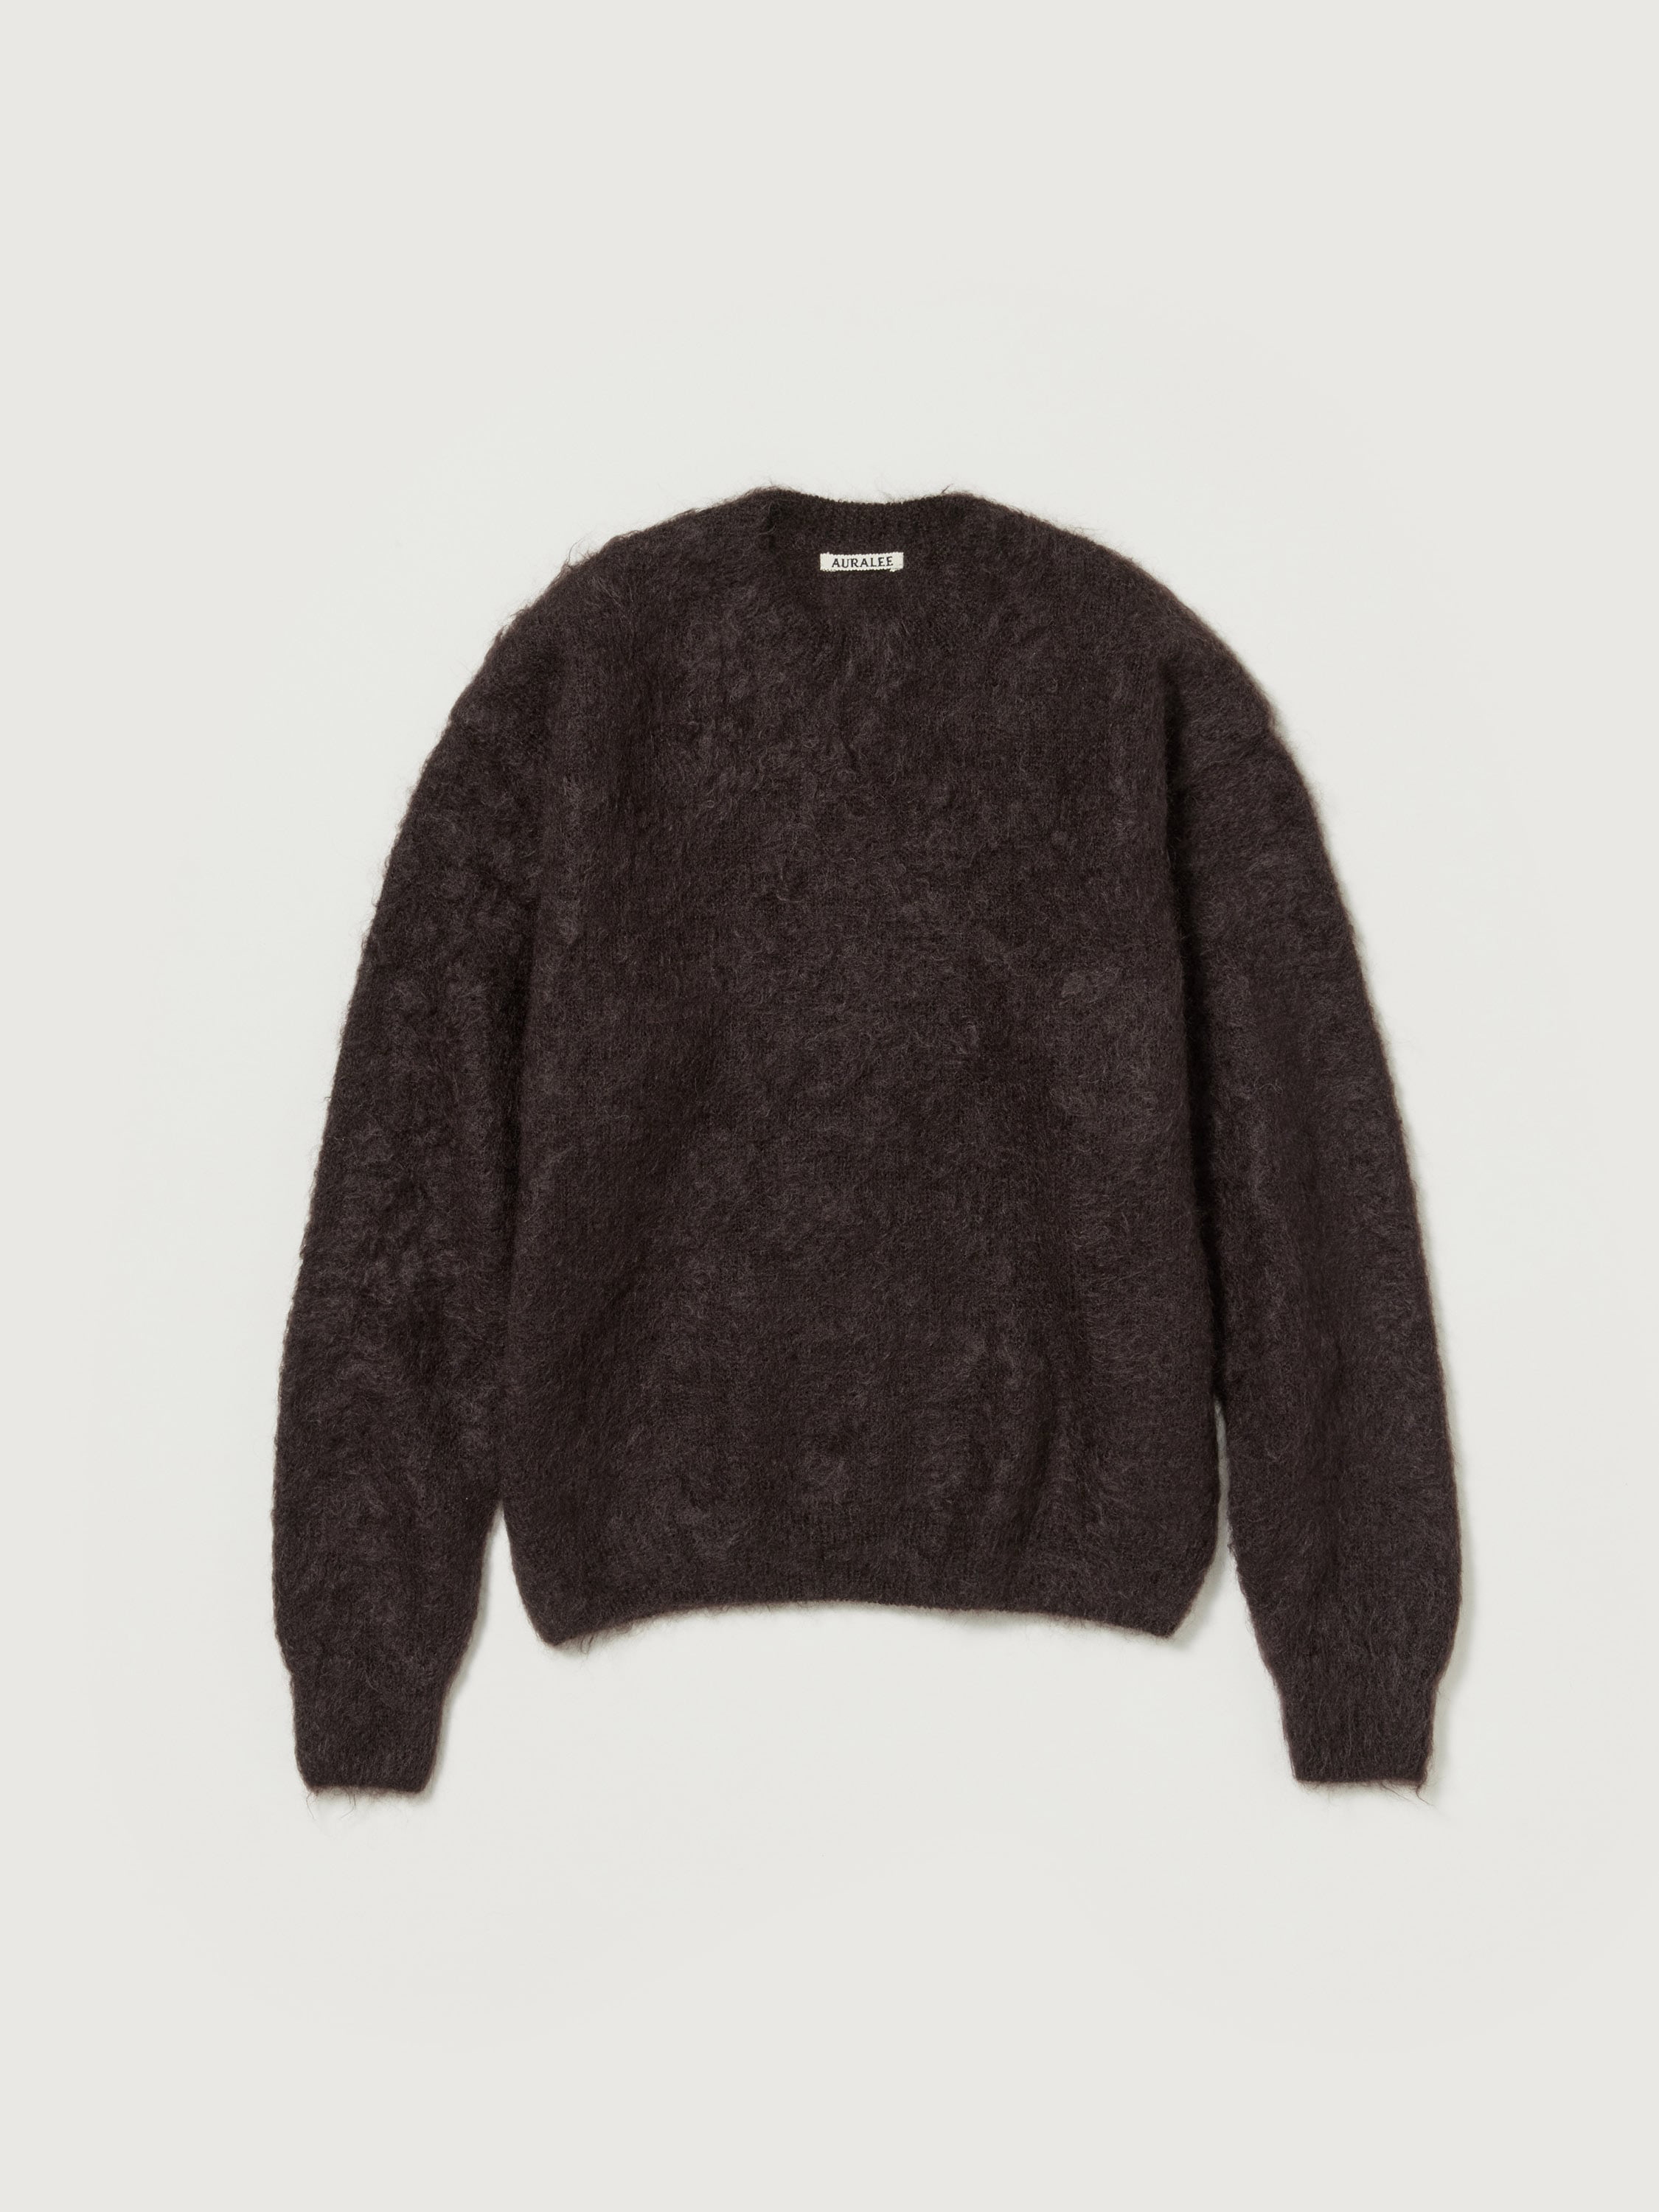 BRUSHED SUPER KID MOHAIR KNIT P/O 詳細画像 DARK BROWN 4